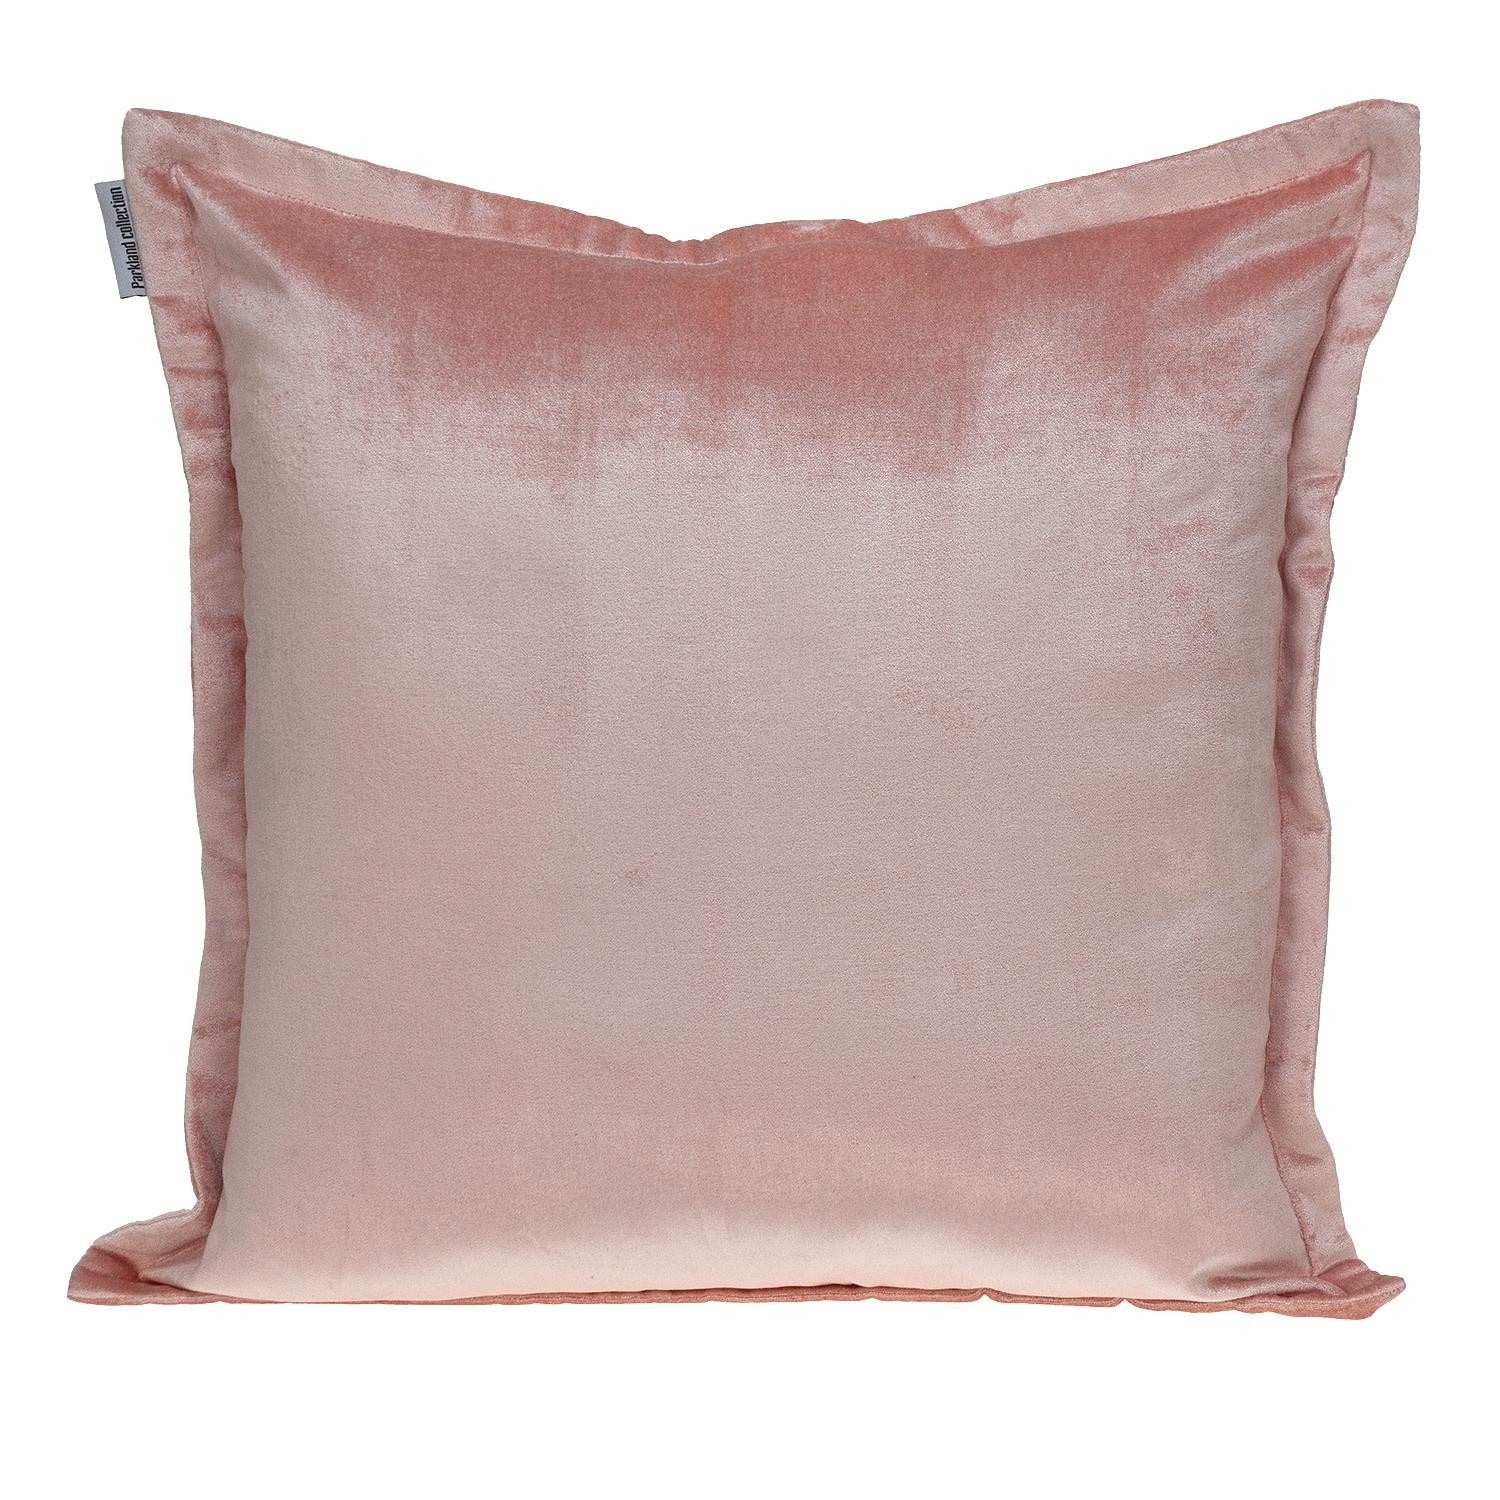 https://ak1.ostkcdn.com/images/products/is/images/direct/7798dbf490b1e50f7a2f2698b7e6305067ab8ed2/Premier-24%22-Soft-Touch-Metallic-Pink-Solid-Color-Accent-Pillow.jpg